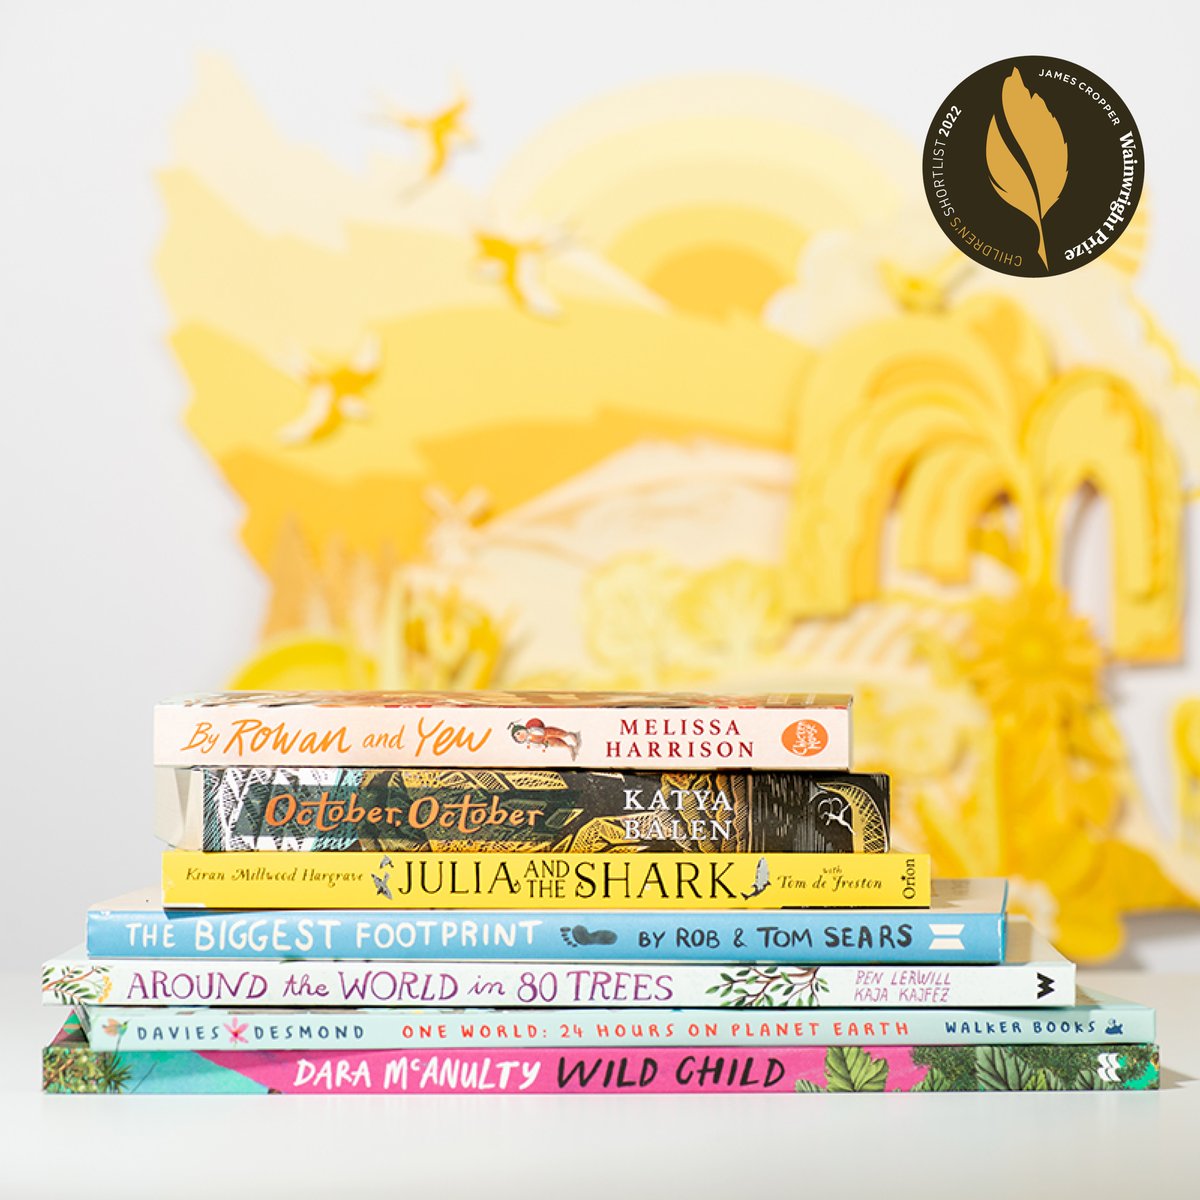 2/2 The #WainwrightPrize22 shortlist for writing on #Nature & #Conservation for Children is… ⭐️🧡 One World, @nicolakidsbooks @JenEDesmondArt The Biggest Footprint, Rob & Tom Sears Wild Child, @NaturalistDara @Barry_Falls #JCWP22 @jamescropper